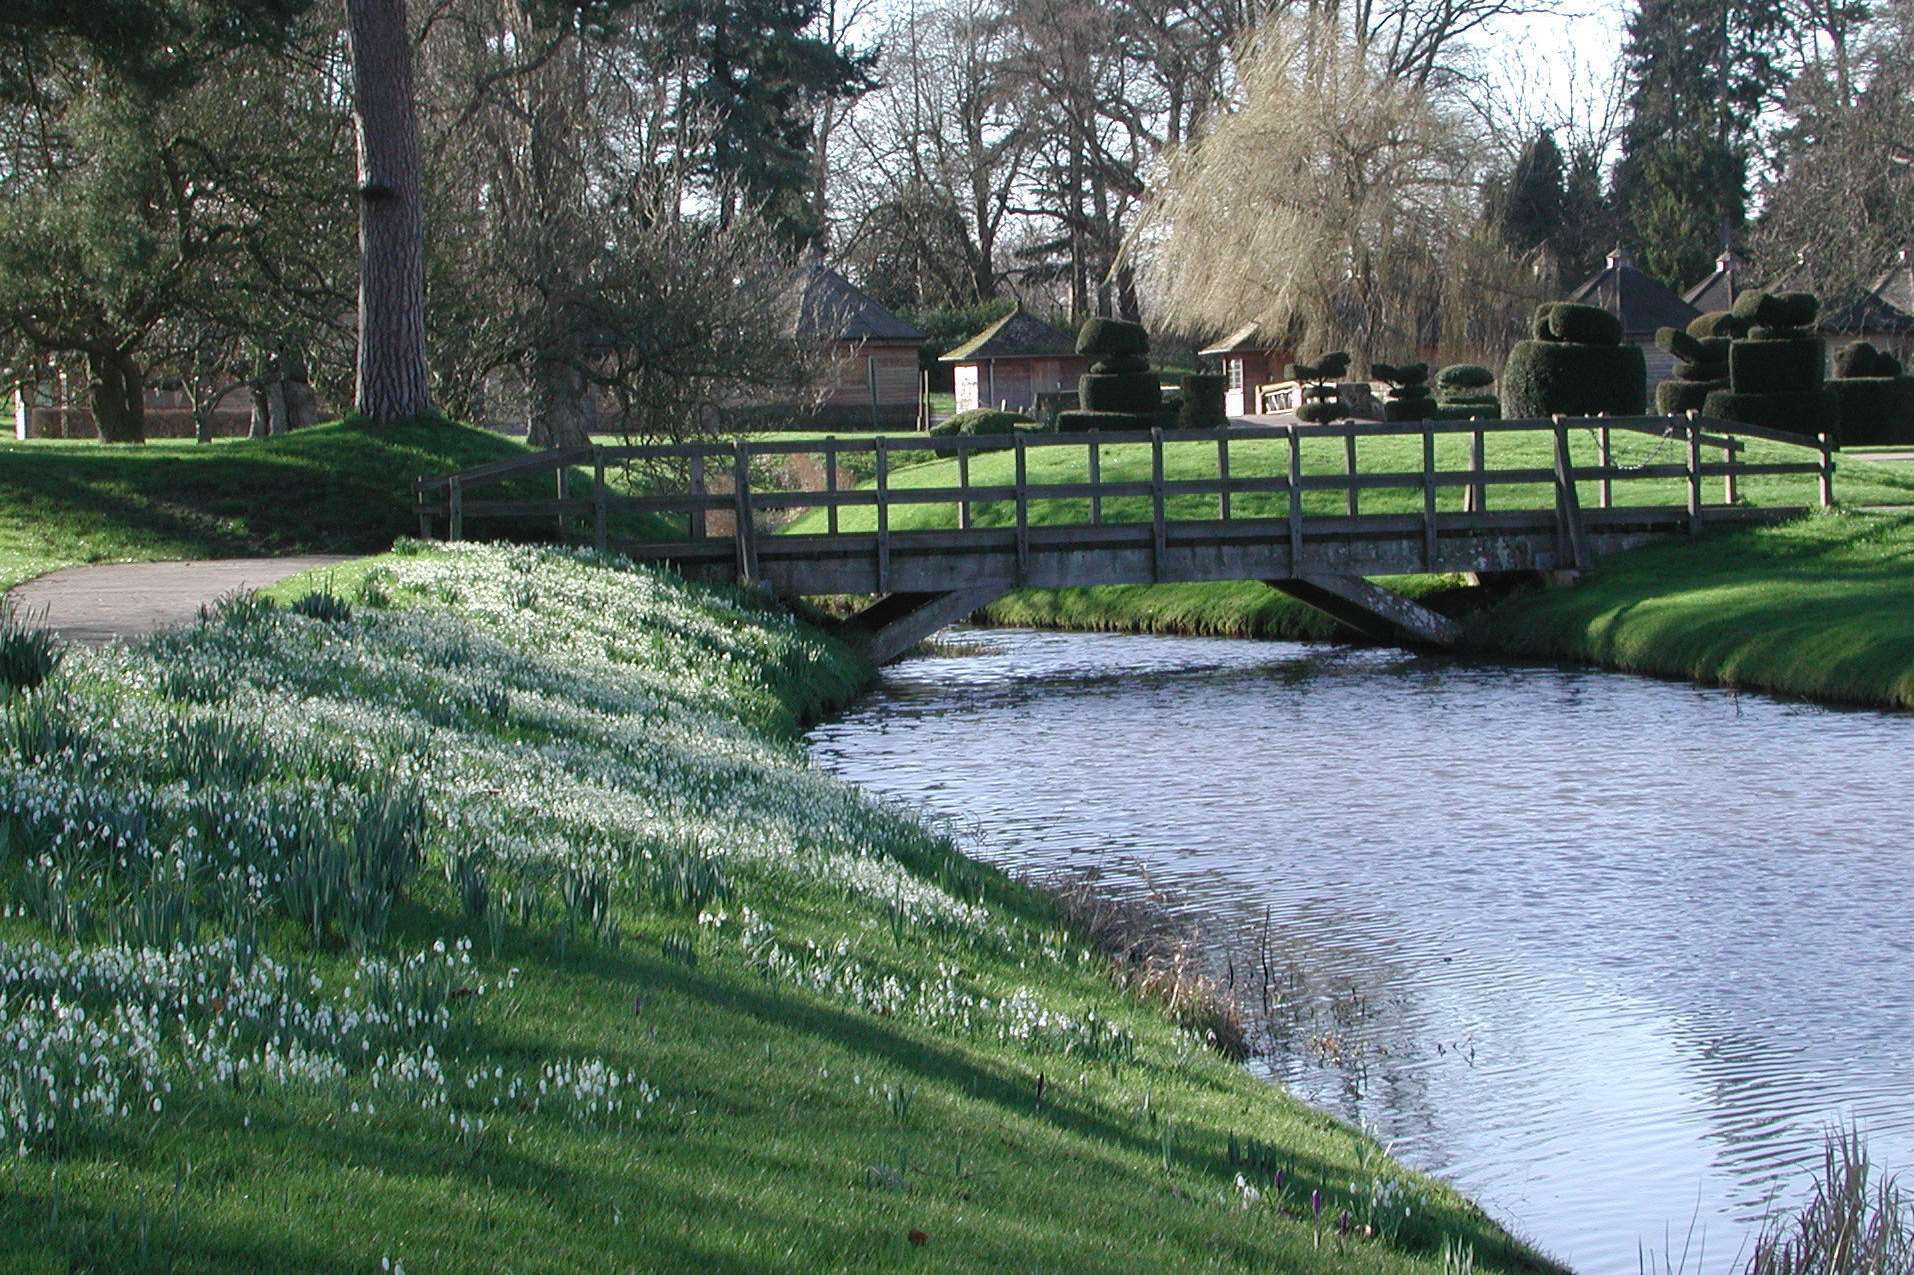 The snowdrop trail at Hever Castle